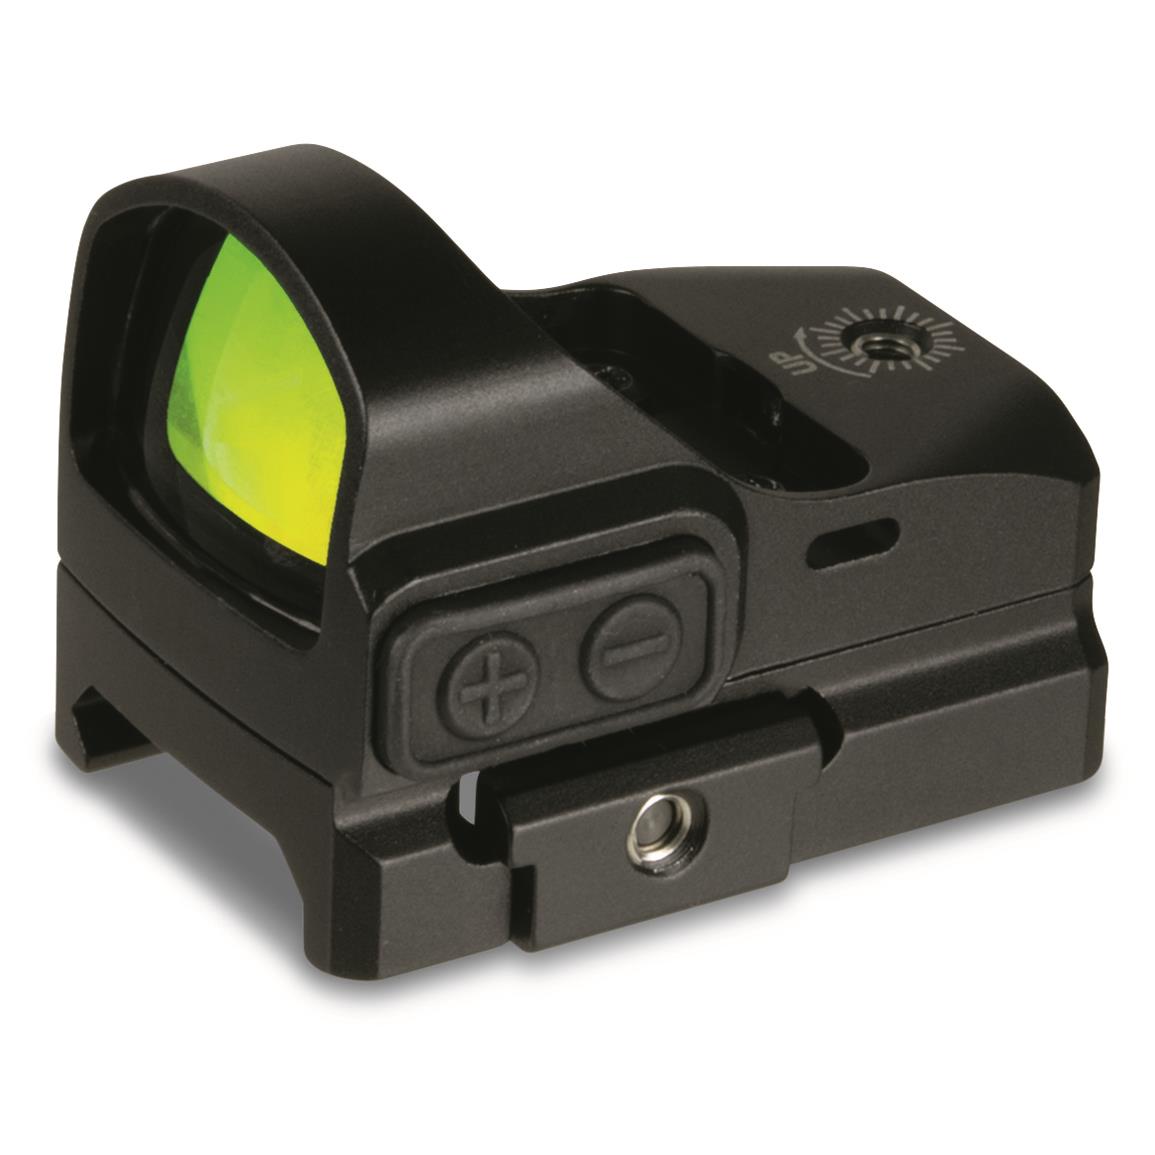 TRUGLO TG8100B Micro Red Dot Sight for sale online 